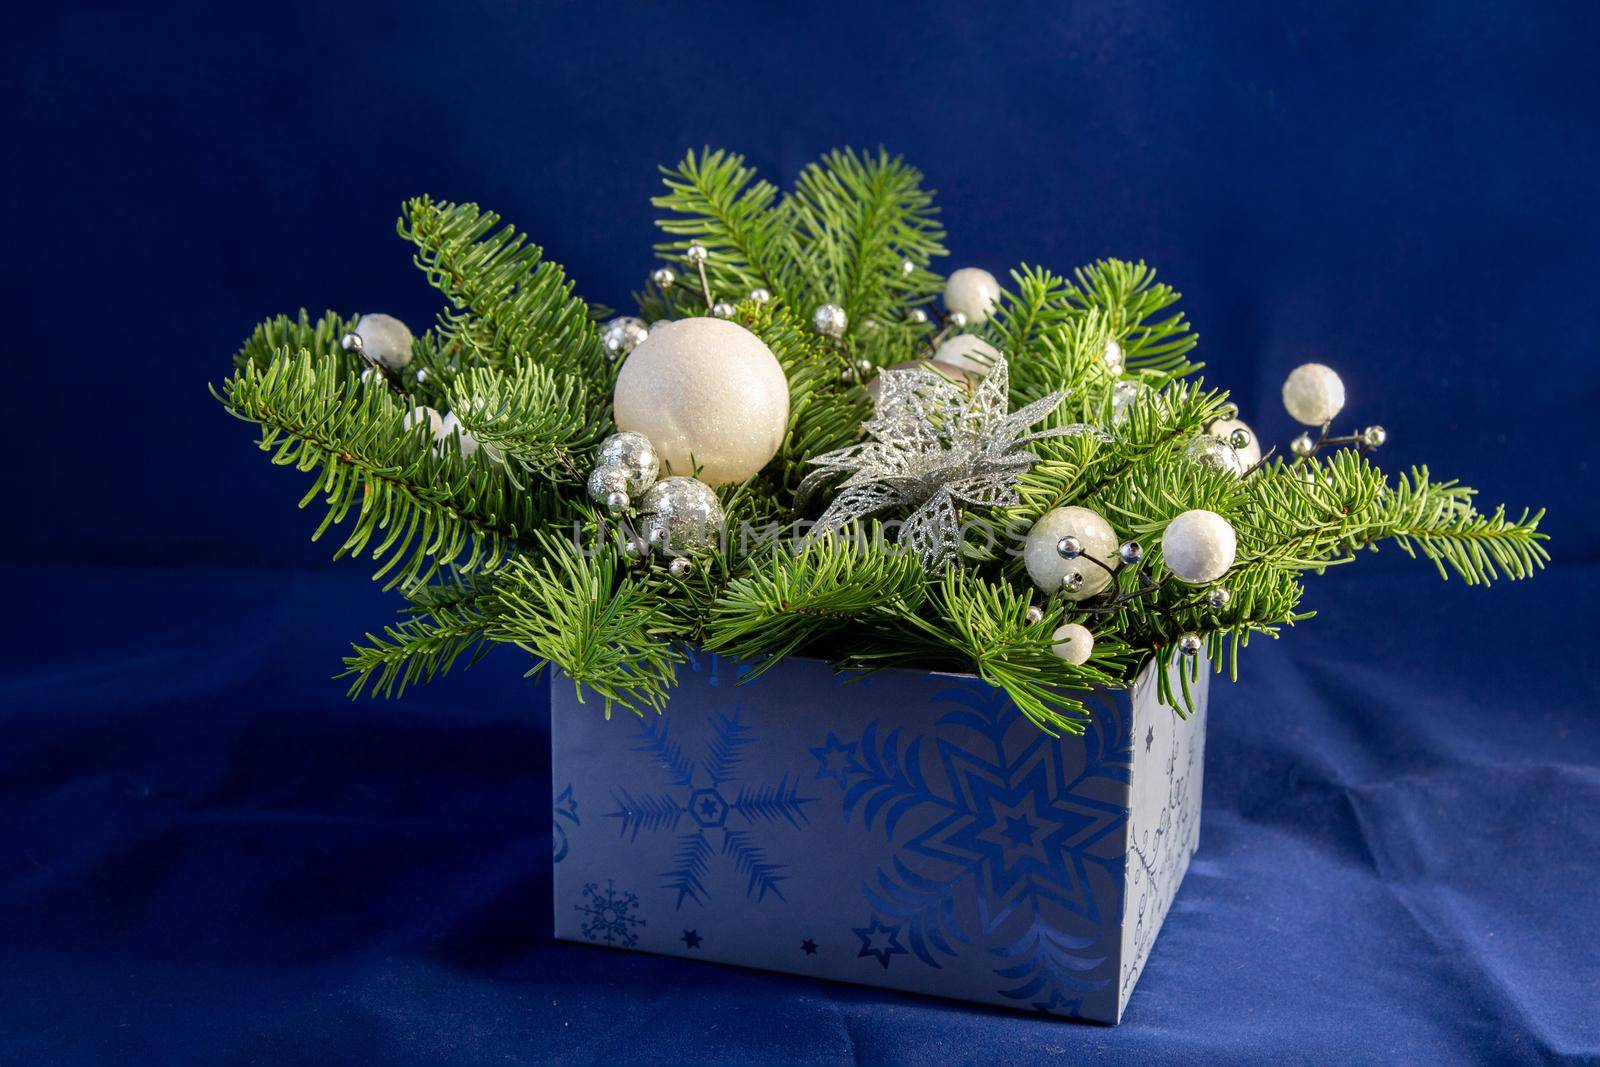 Christmas composition with conifers in yokes and white balls in a blue box on blue background by Mariaprovector